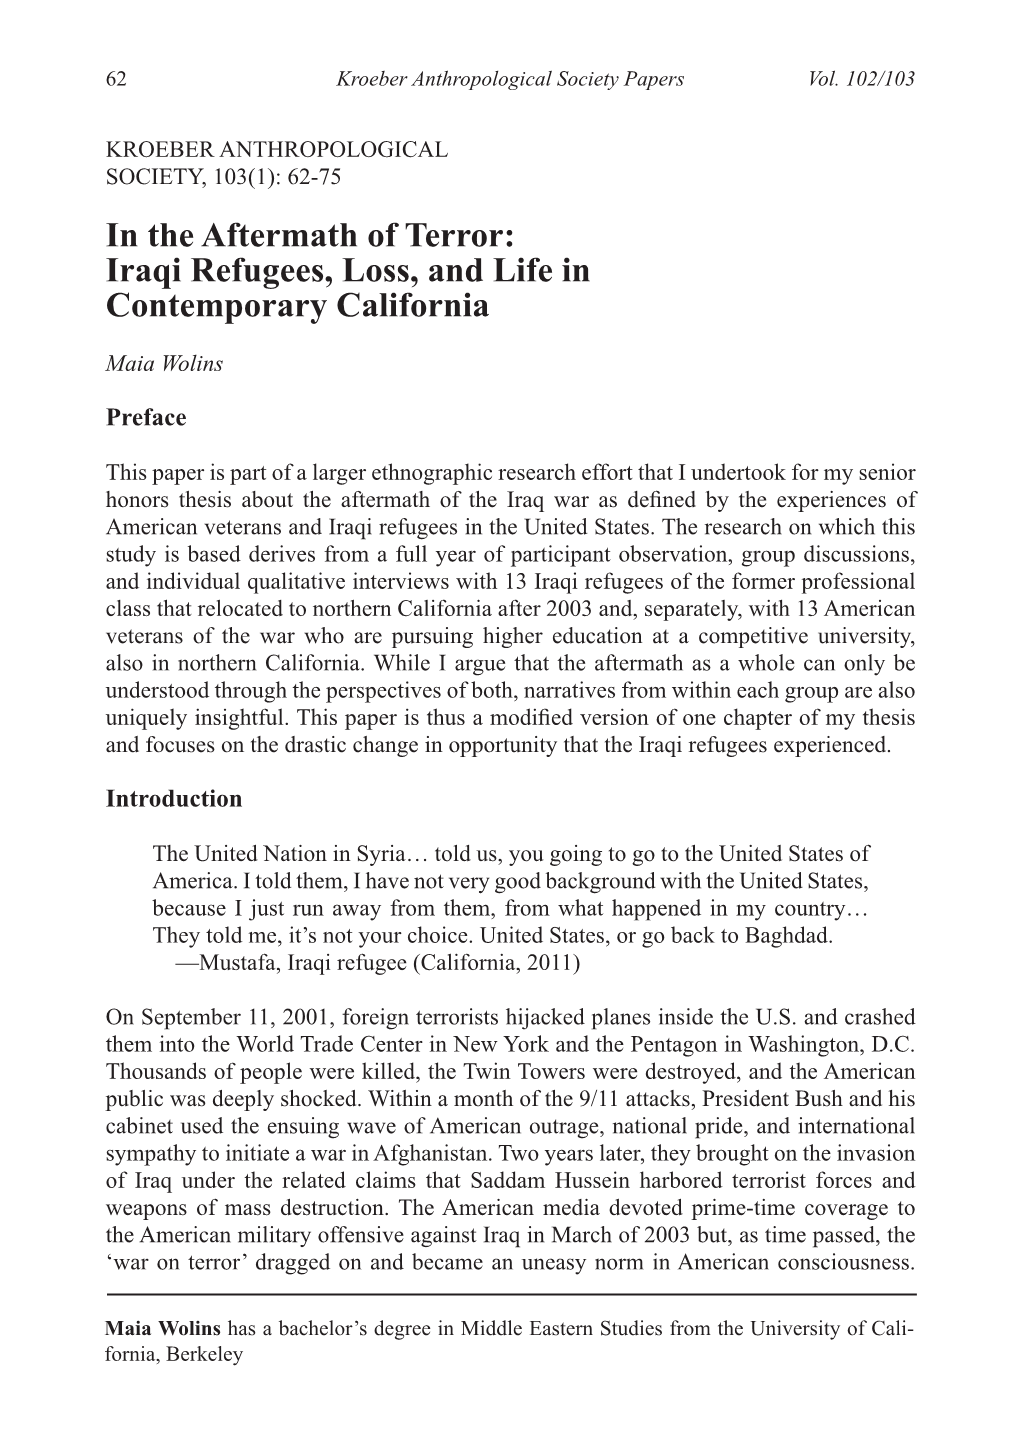 Iraqi Refugees, Loss, and Life in Contemporary California